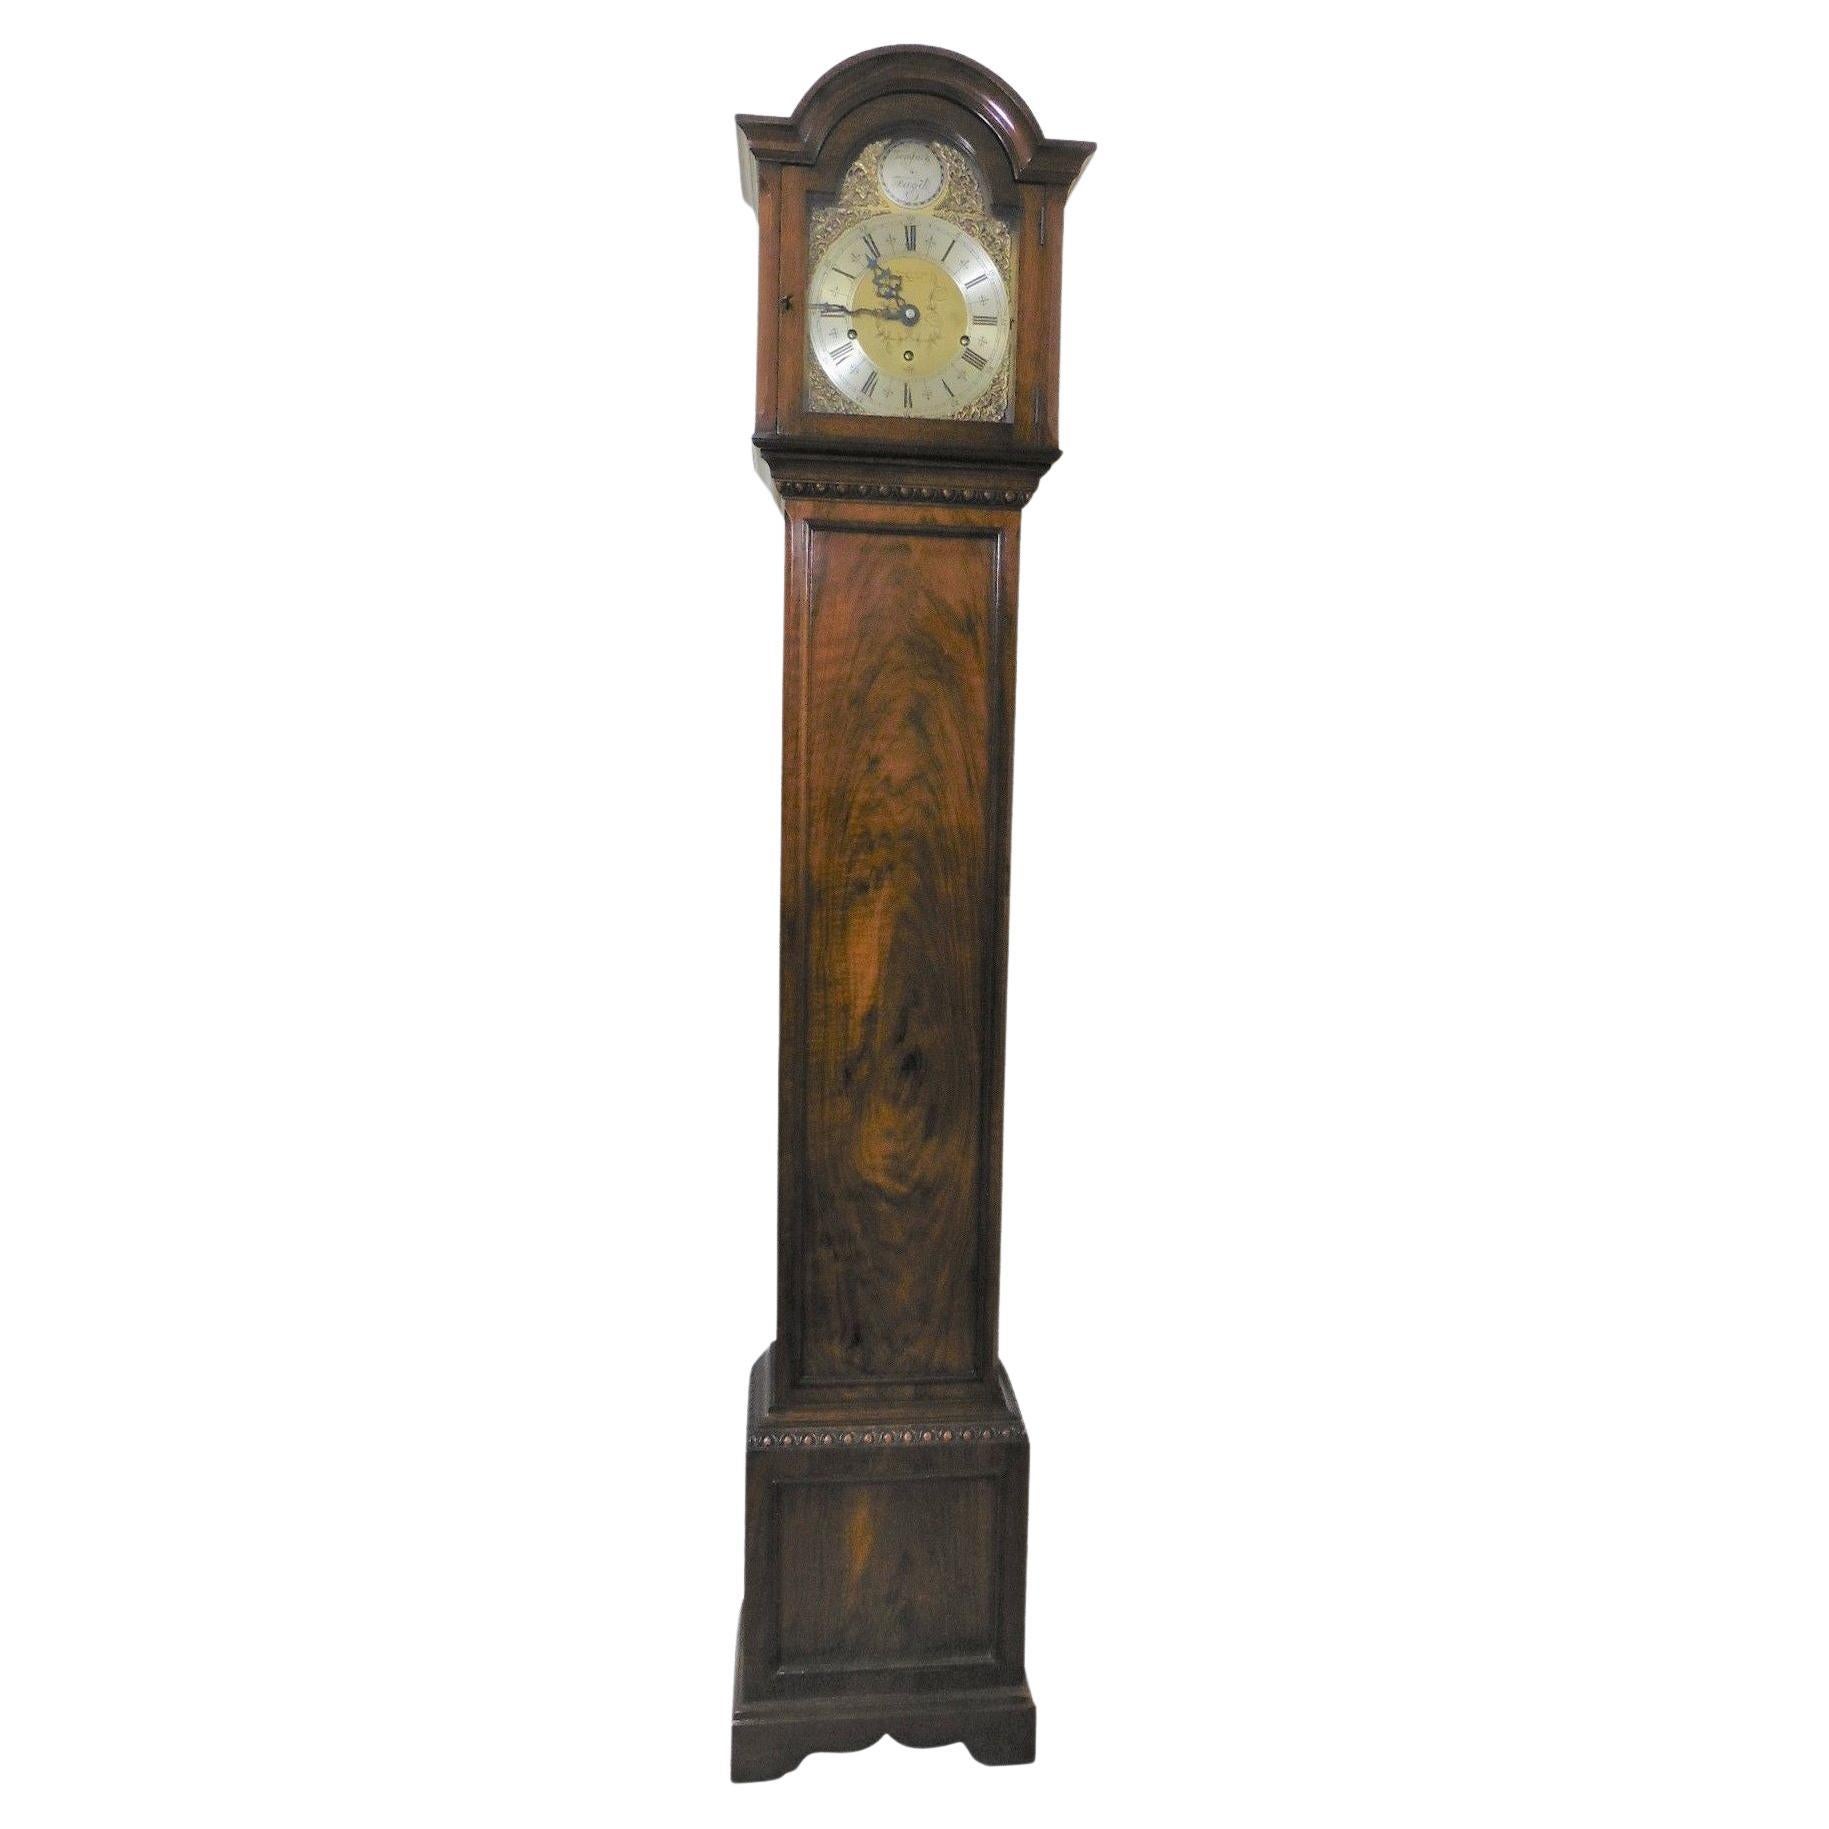 Walnut Westminster Chiming Grandmother Clock Retailed by Garrards, London